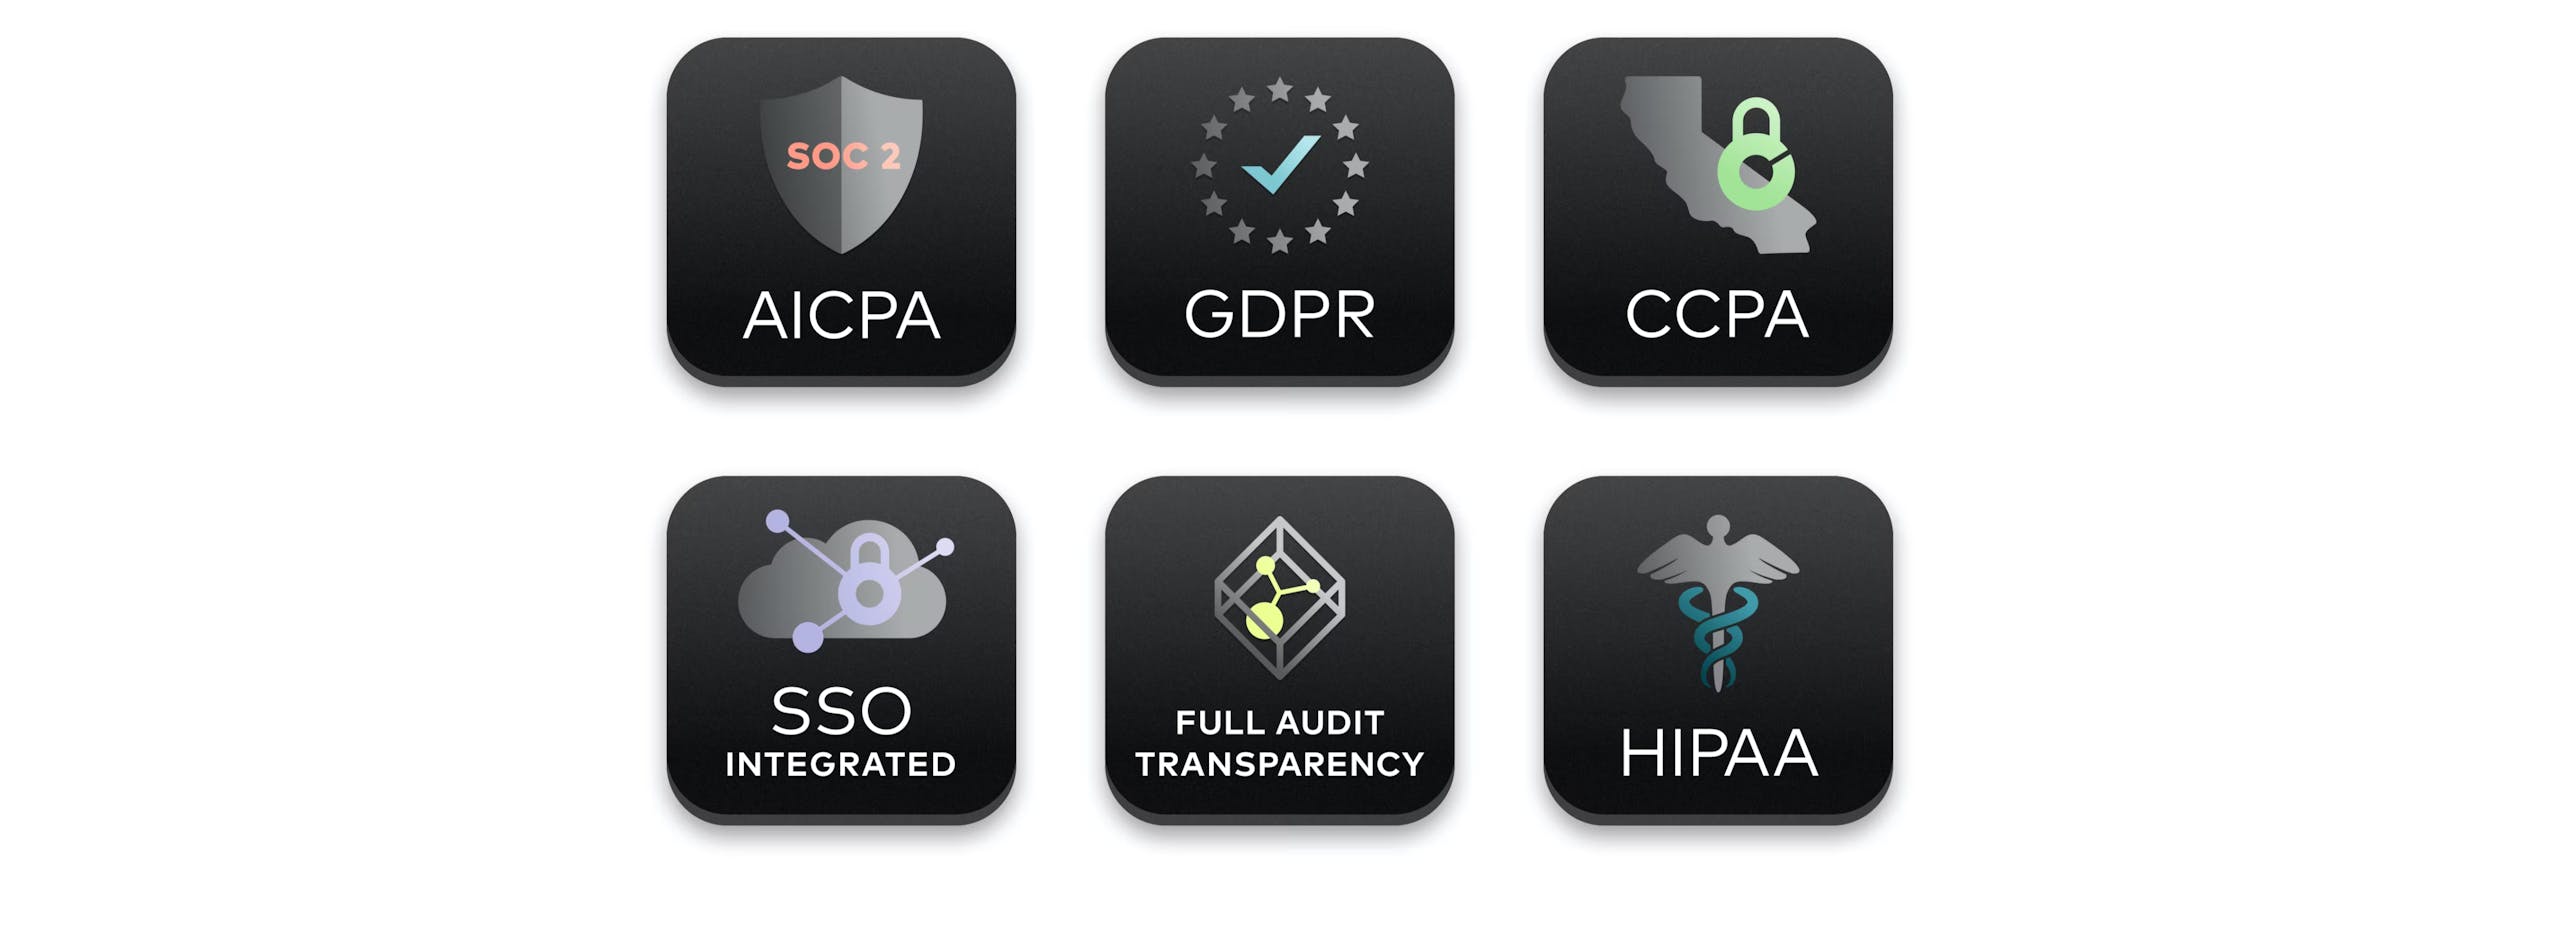 Badges of our security credentials - SOC2, GDPR, CCPA, SSO Integrated, HIPAA, Full Audit Transparency